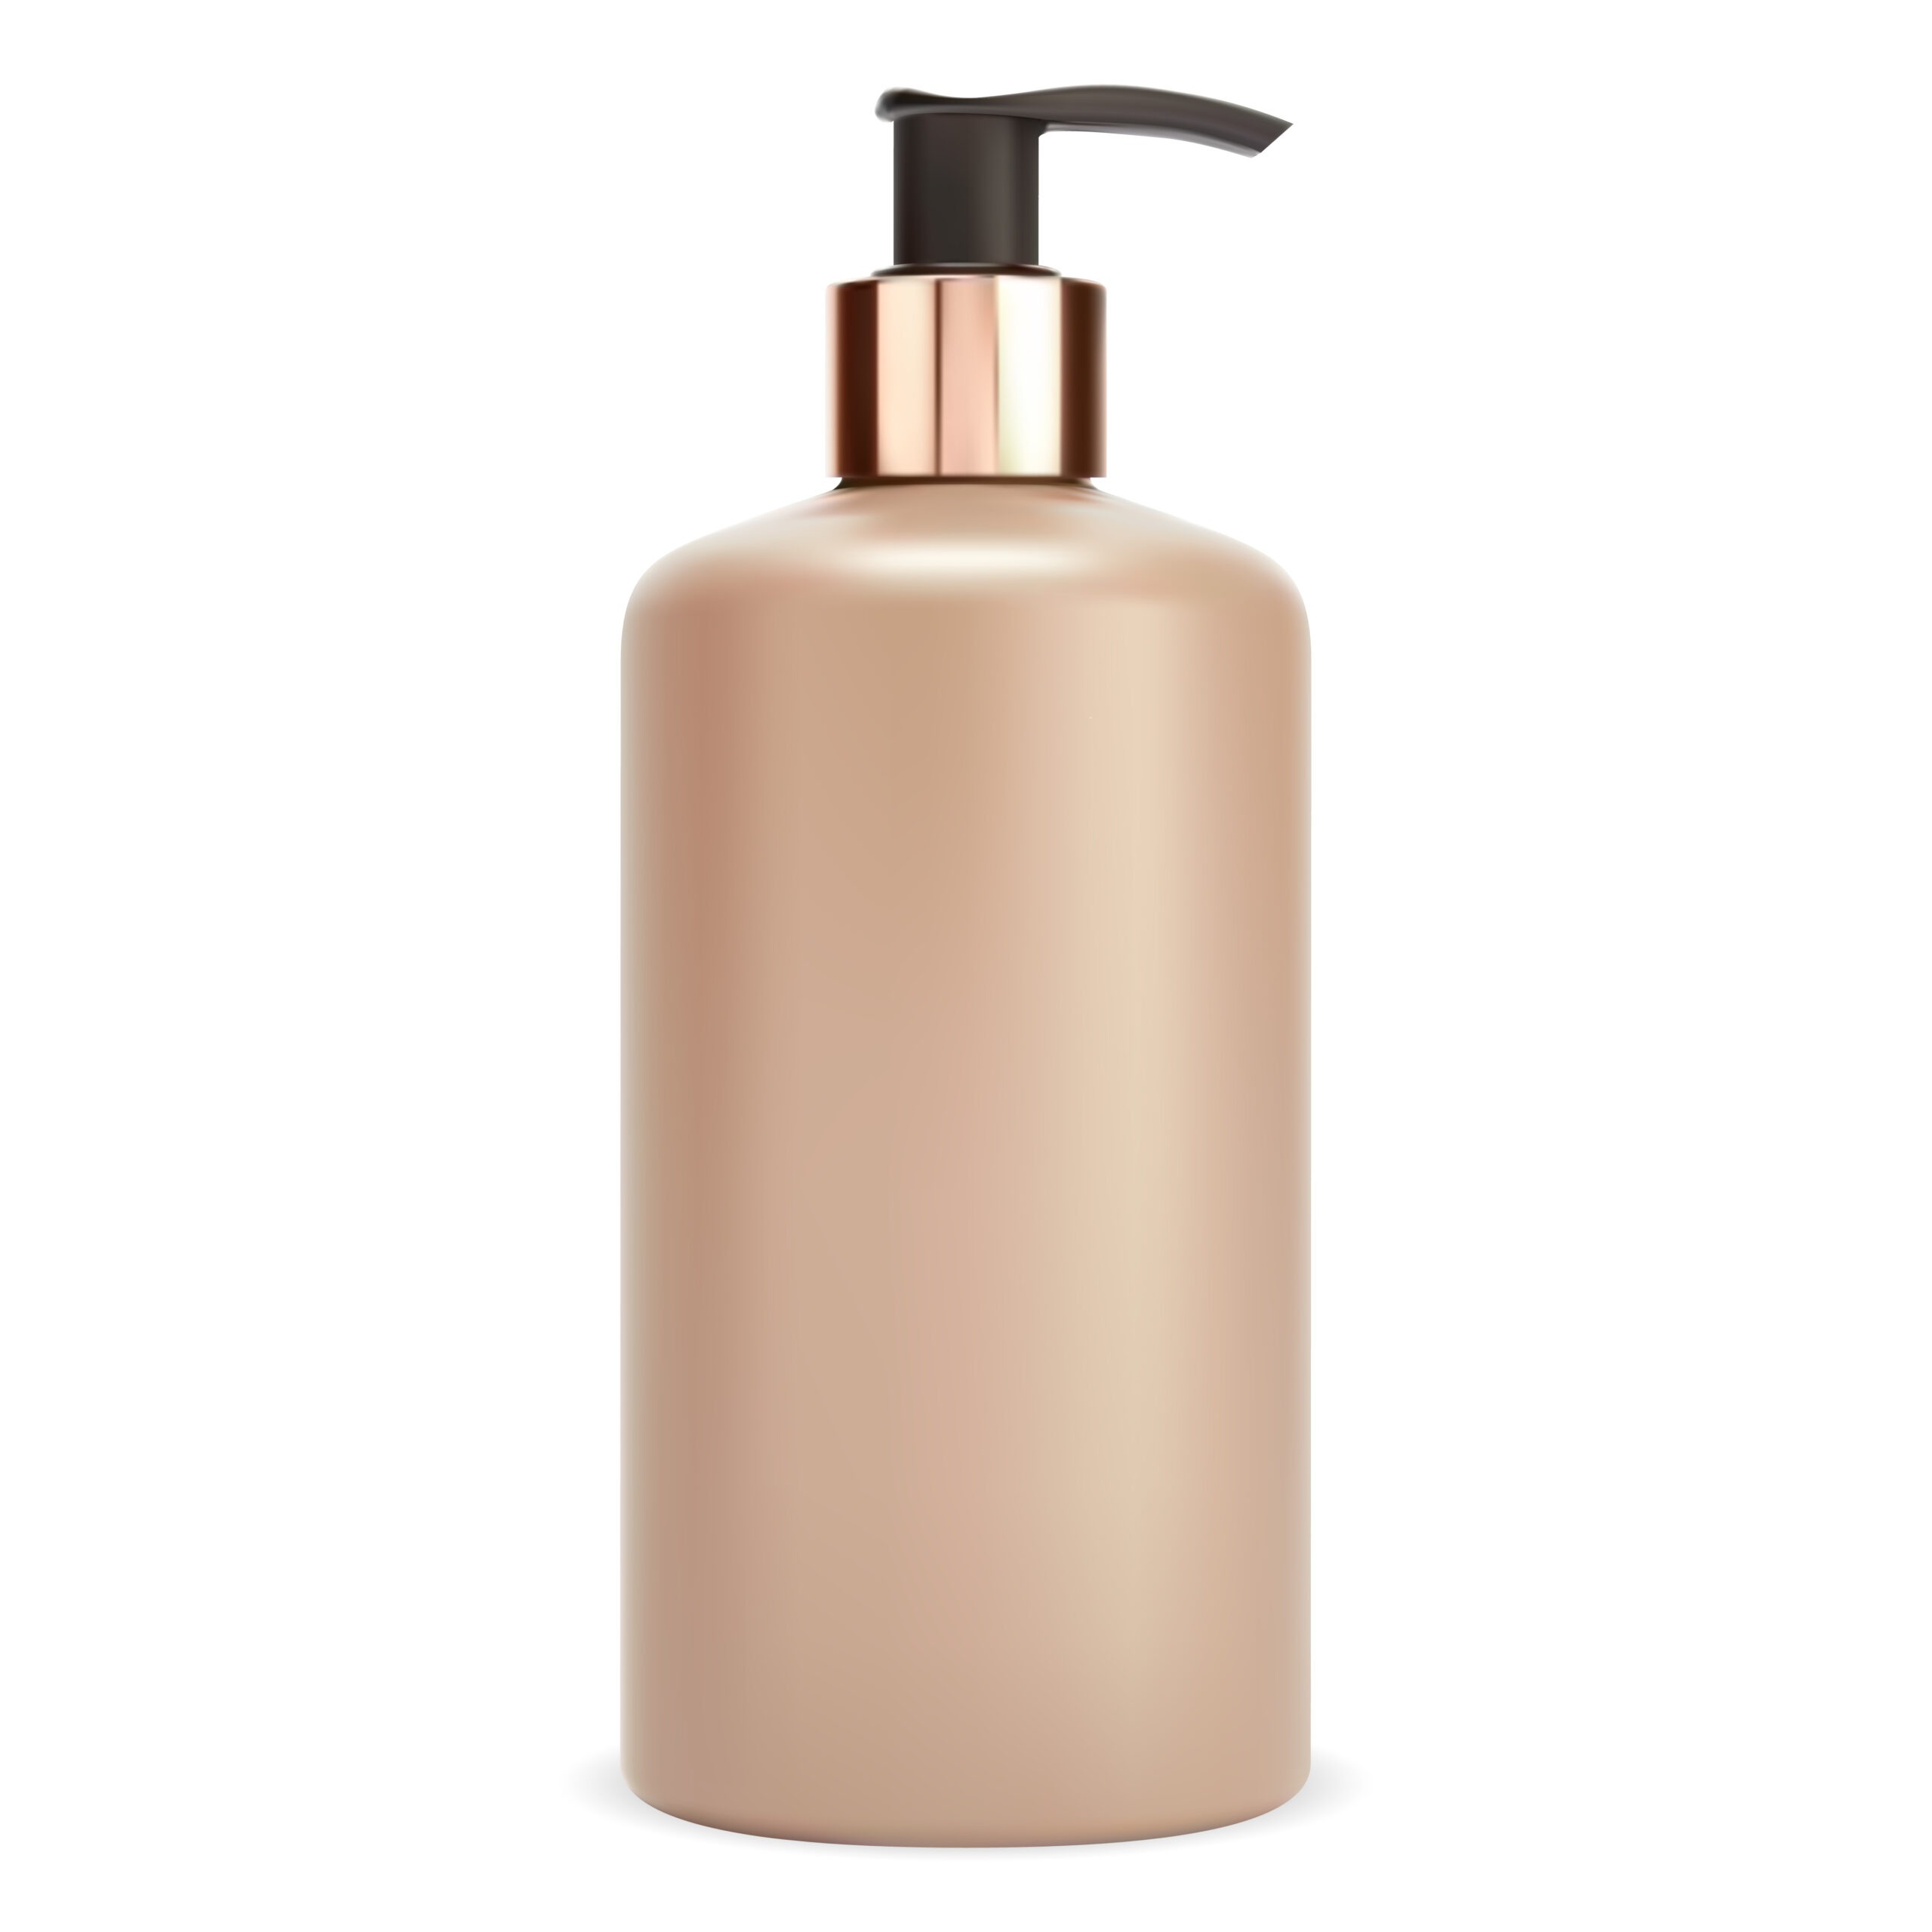 pump bottle in peach color against white background